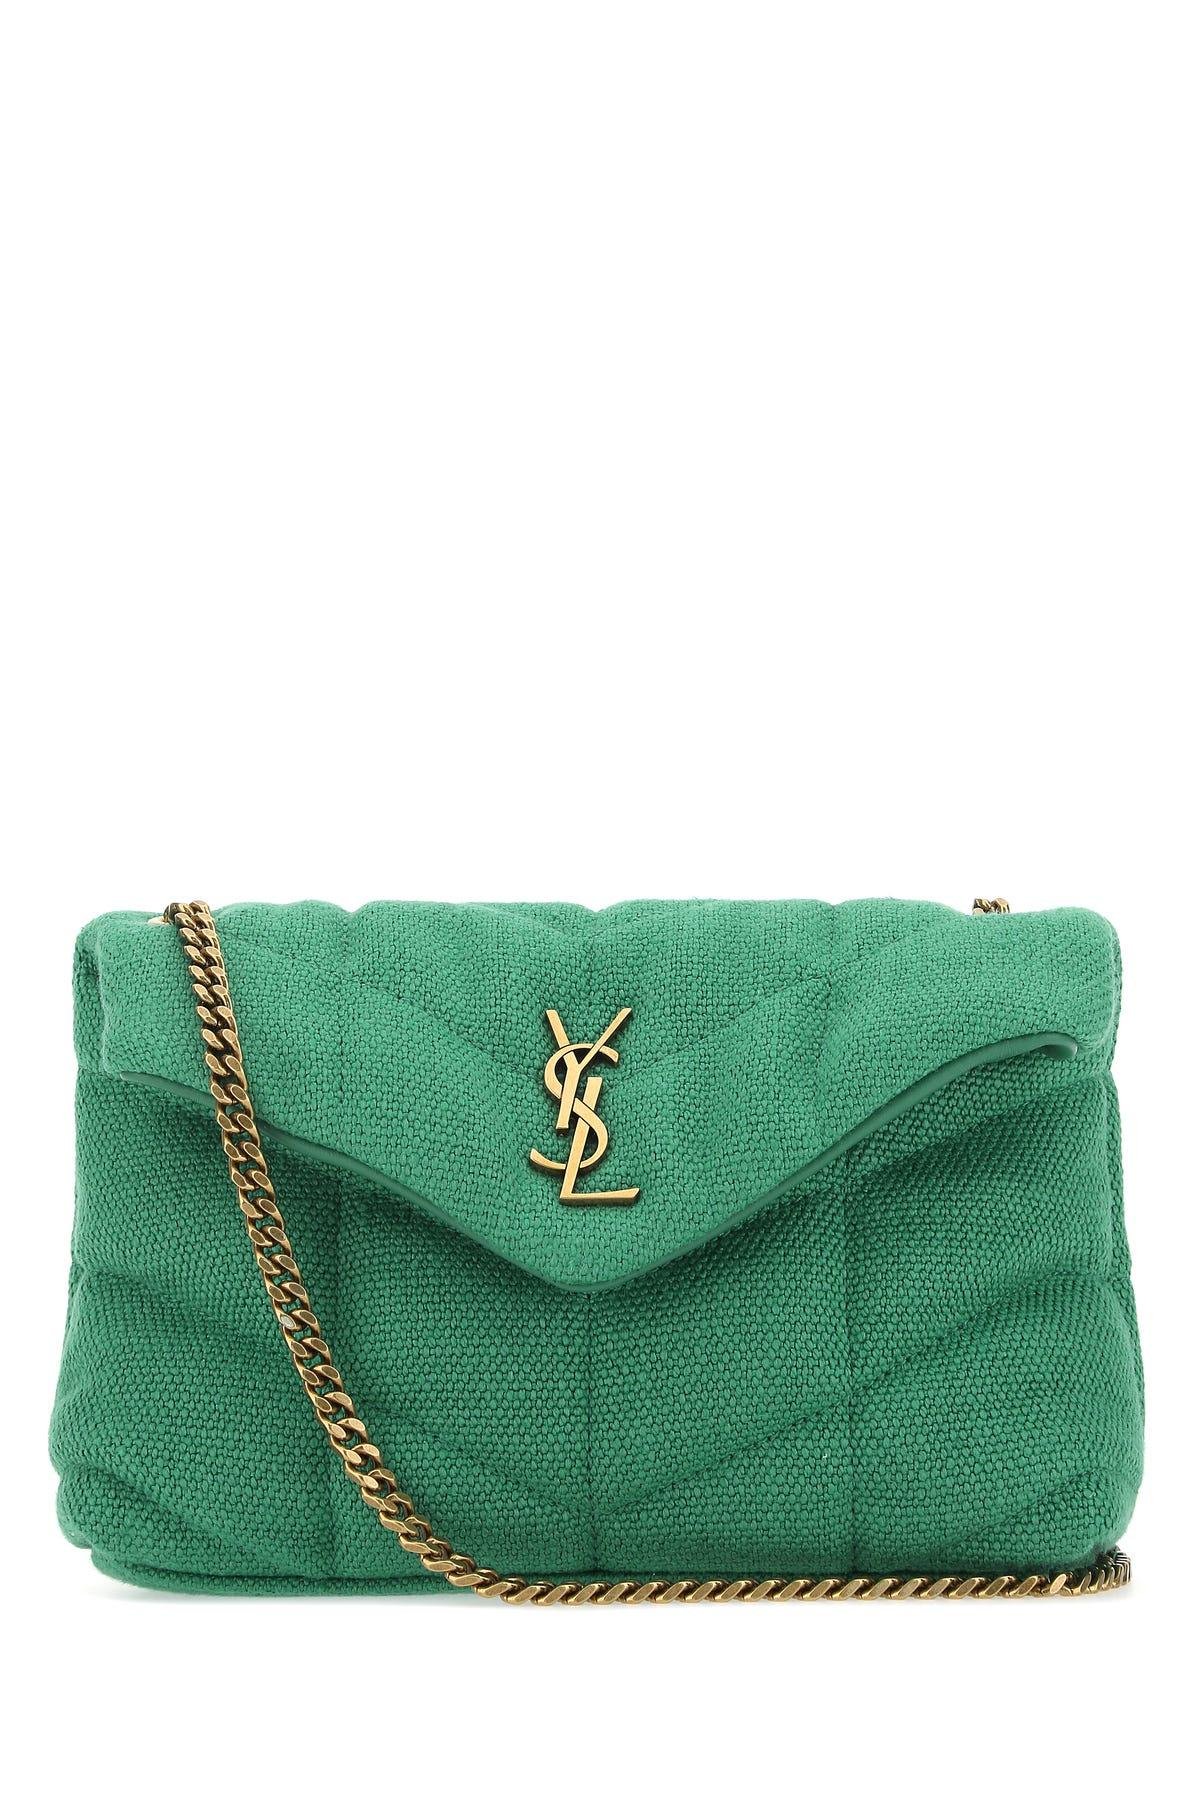 Saint Laurent Puffer Toy Quilted Bag - Farfetch